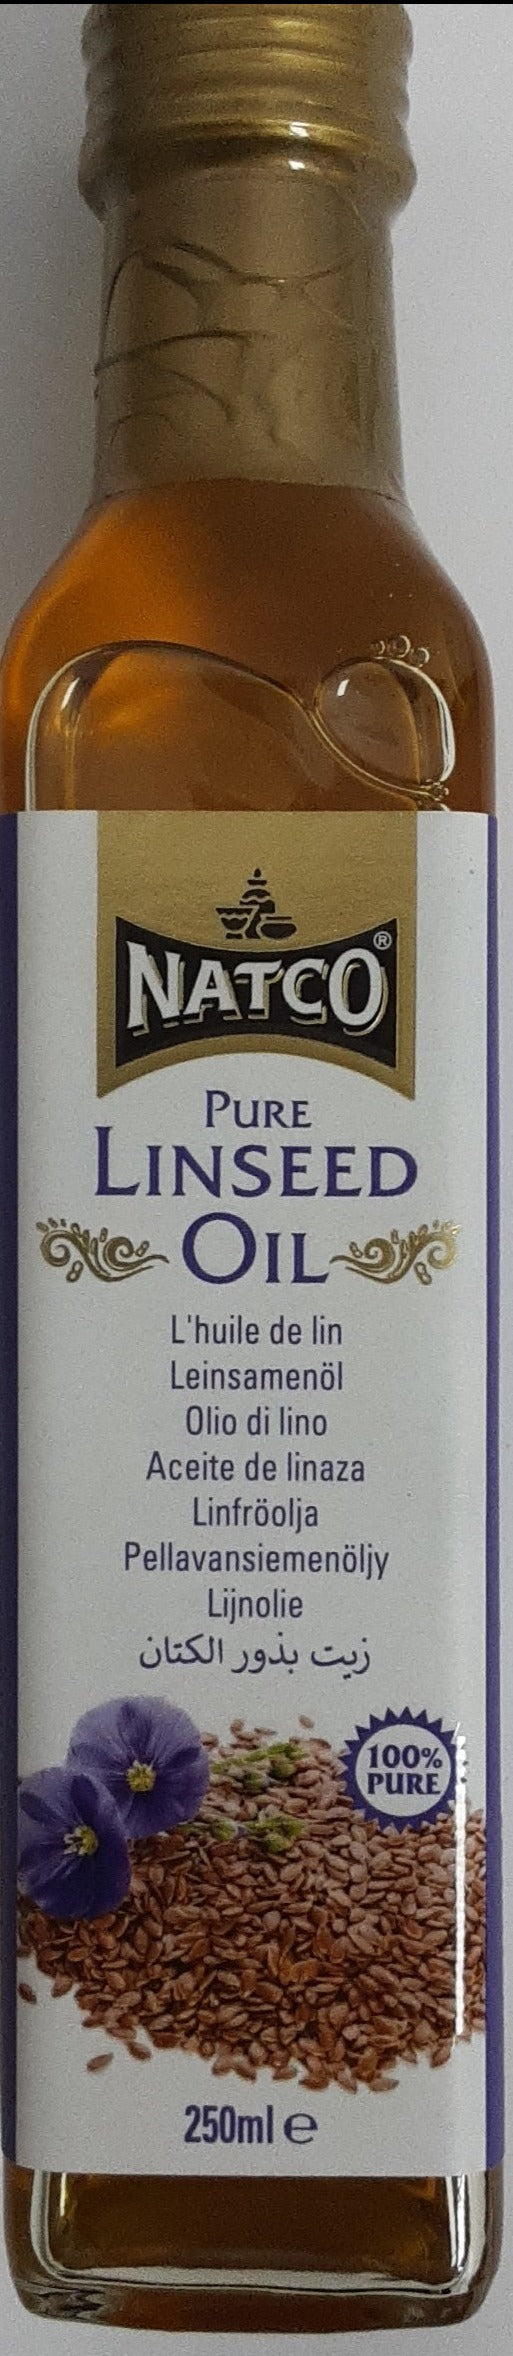 Natco Oil Pure Linseed 250ml